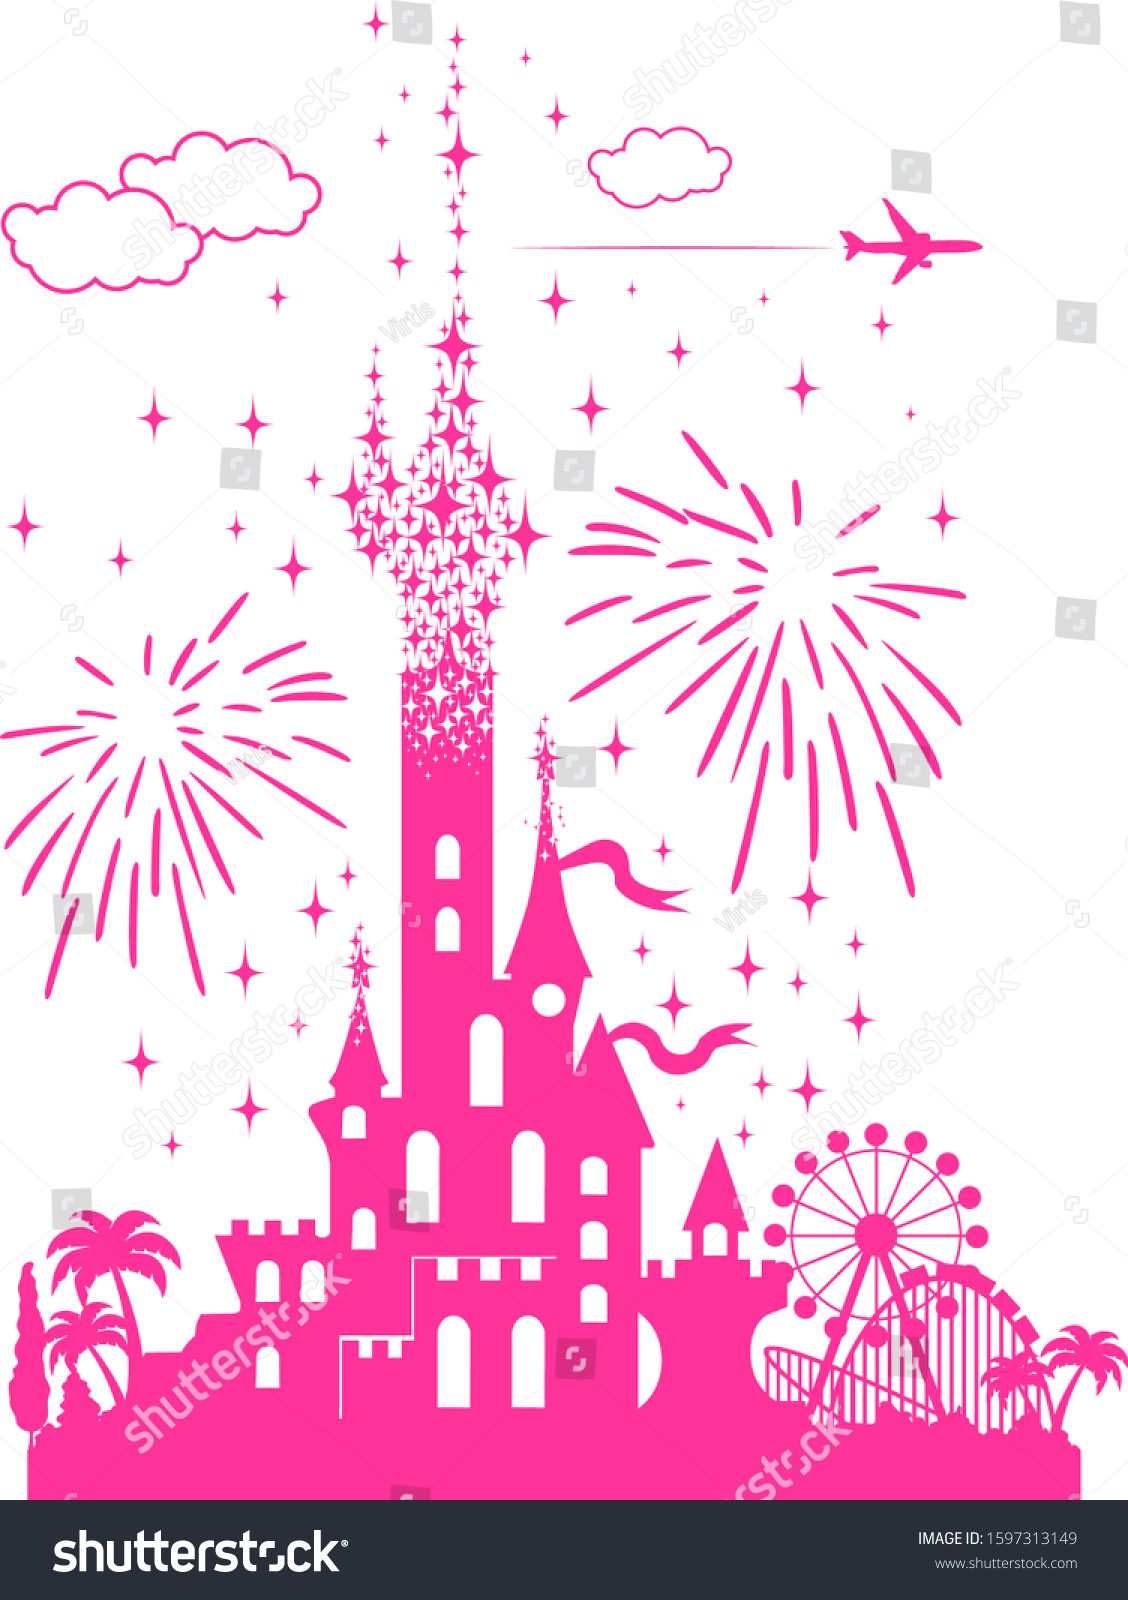 SVG of Fairytail pink castle with a landscape of attractions, fireworks and airliner. Tourist tour for children in an amusement park. Illustration, vector svg